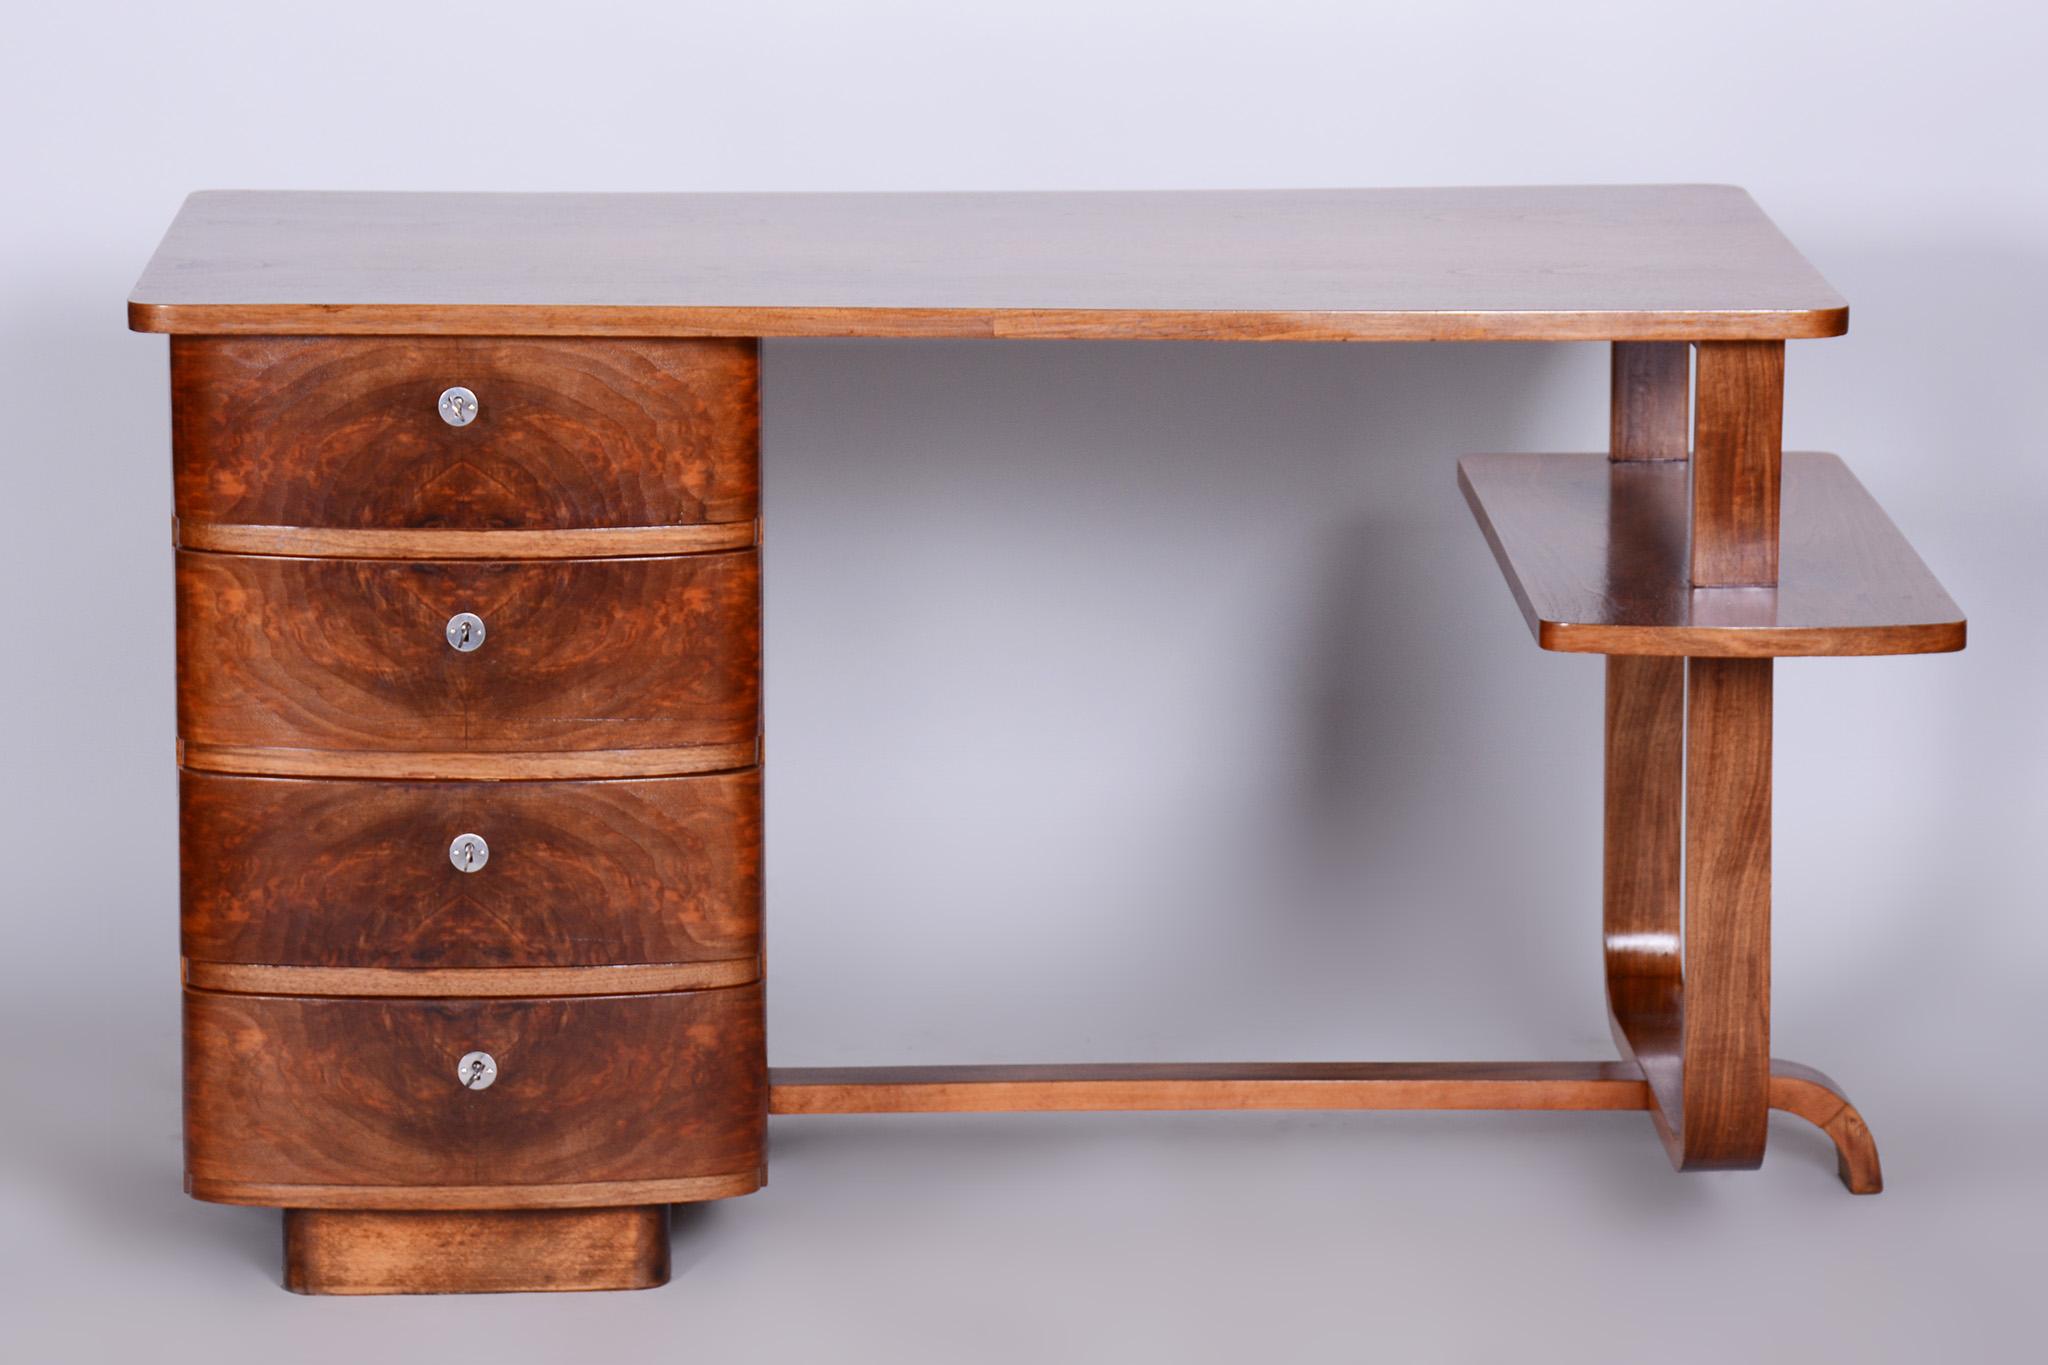 Art Deco walnut writing desk designed by Czech Architect Jindrich, 1920-1929.
Maker: UP Zavody.

Completely professionally restored.

The desk was designed as an equivalent to the H-180 desk as a variant without the chrome construction.
 